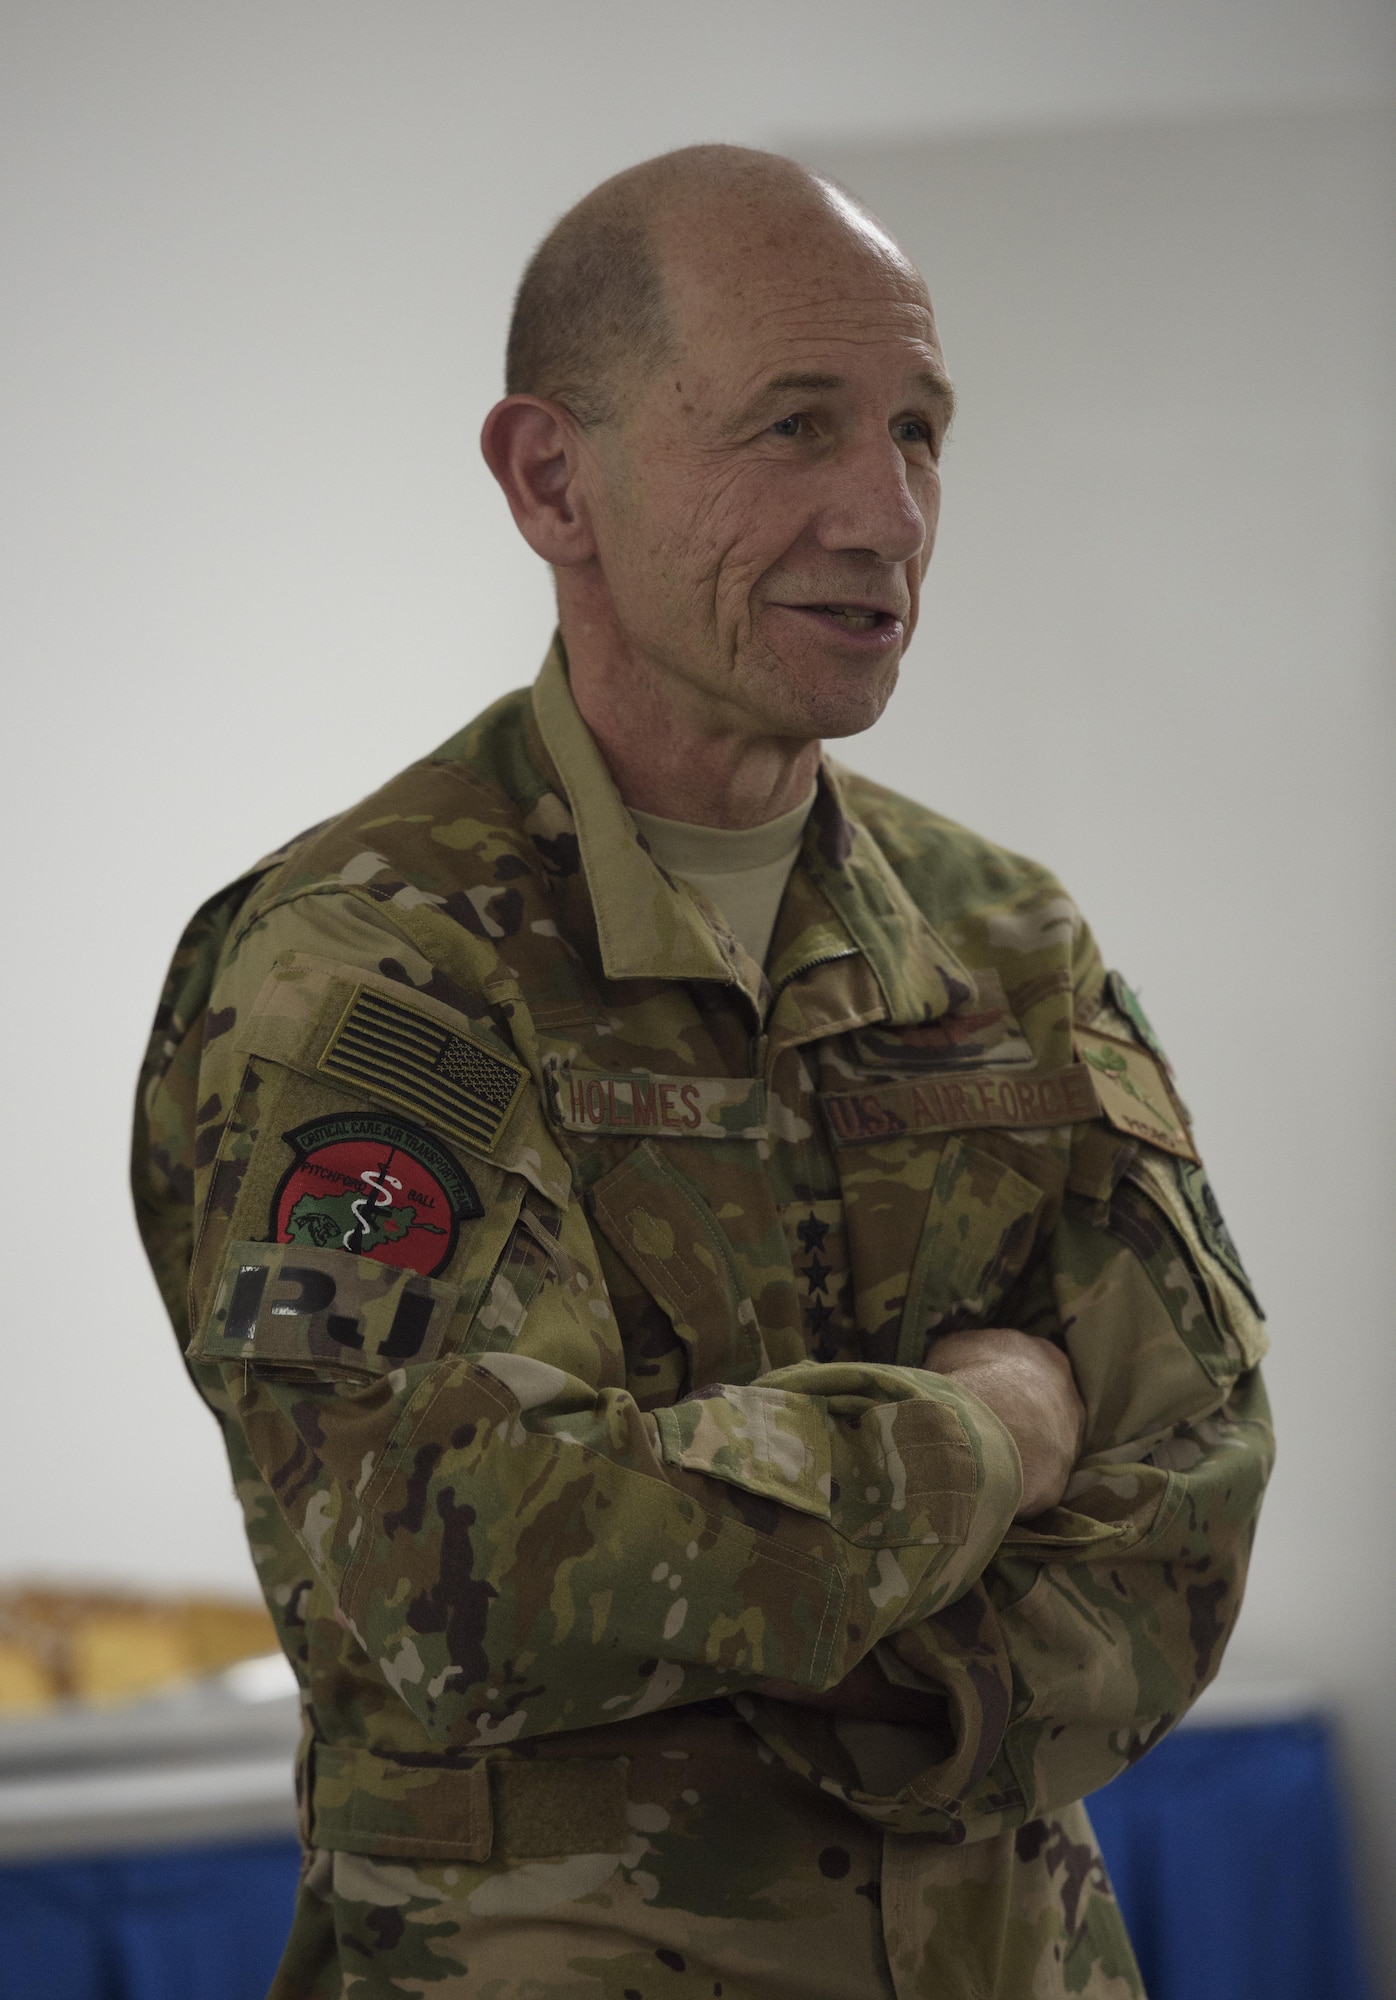 Gen. Mike Holmes, who commanded the 455th Air Expeditionary Wing from March 2008 to April 2009, visited Bagram Airfield, Afghanistan, May 25, 2017. During his visit, Holmes met with Airmen and Soldiers to discuss their role in the Afghanistan theater of operations and how their projection of airpower help make the country better. The units he visited presented him their organizational patch, which he proudly placed on his Occupational Camouflage Pattern uniform in appreciation to their kind gesture. (U.S. Air Force photo by Staff Sgt. Benjamin Gonsier)